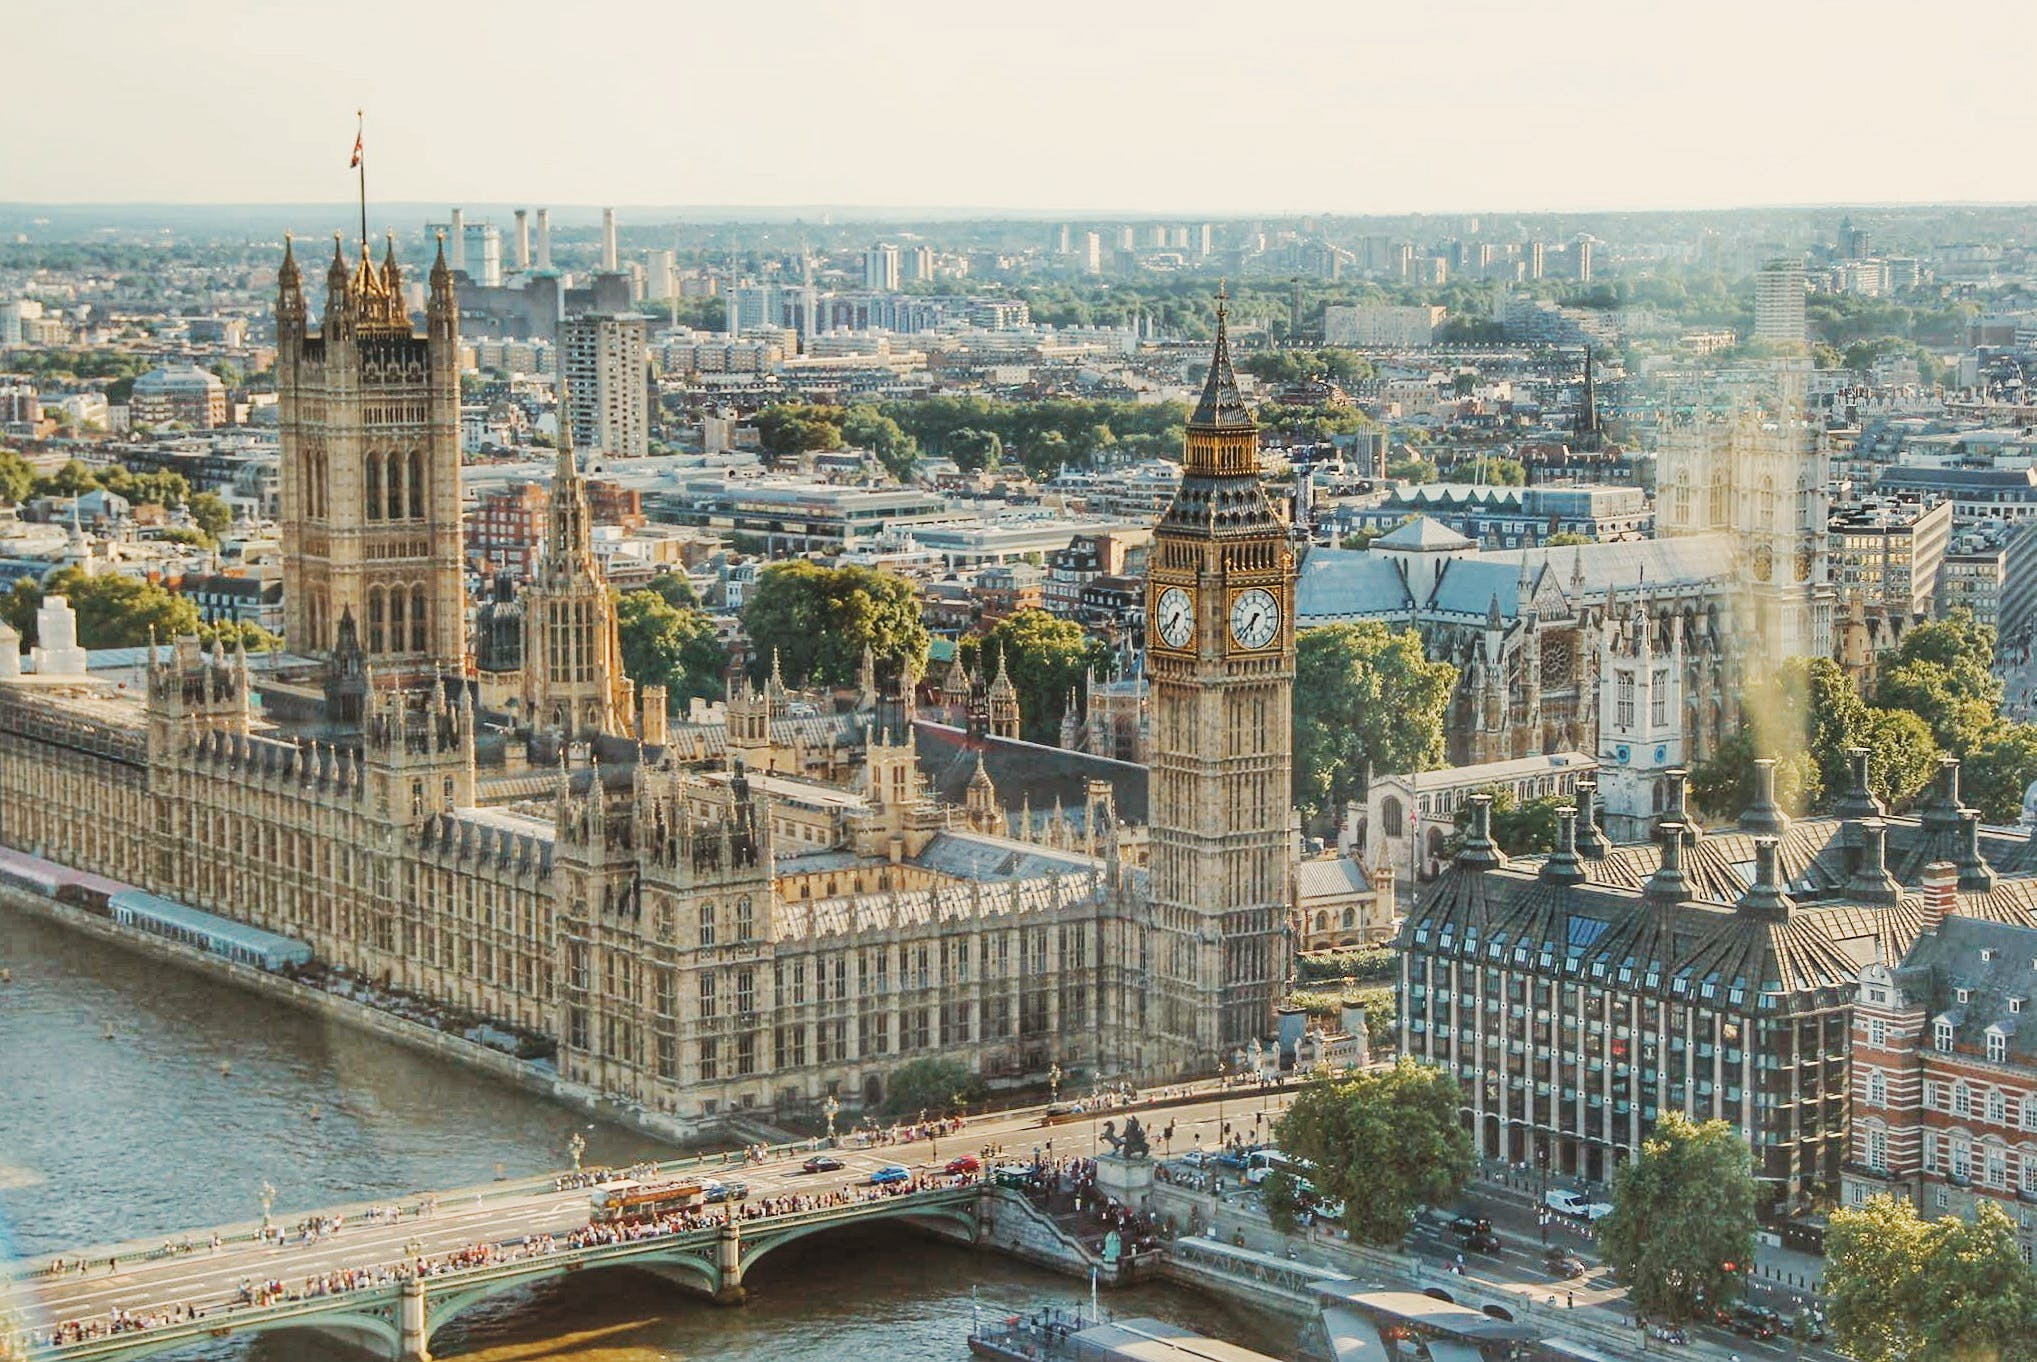 A view of the city of London | Source: Pexels